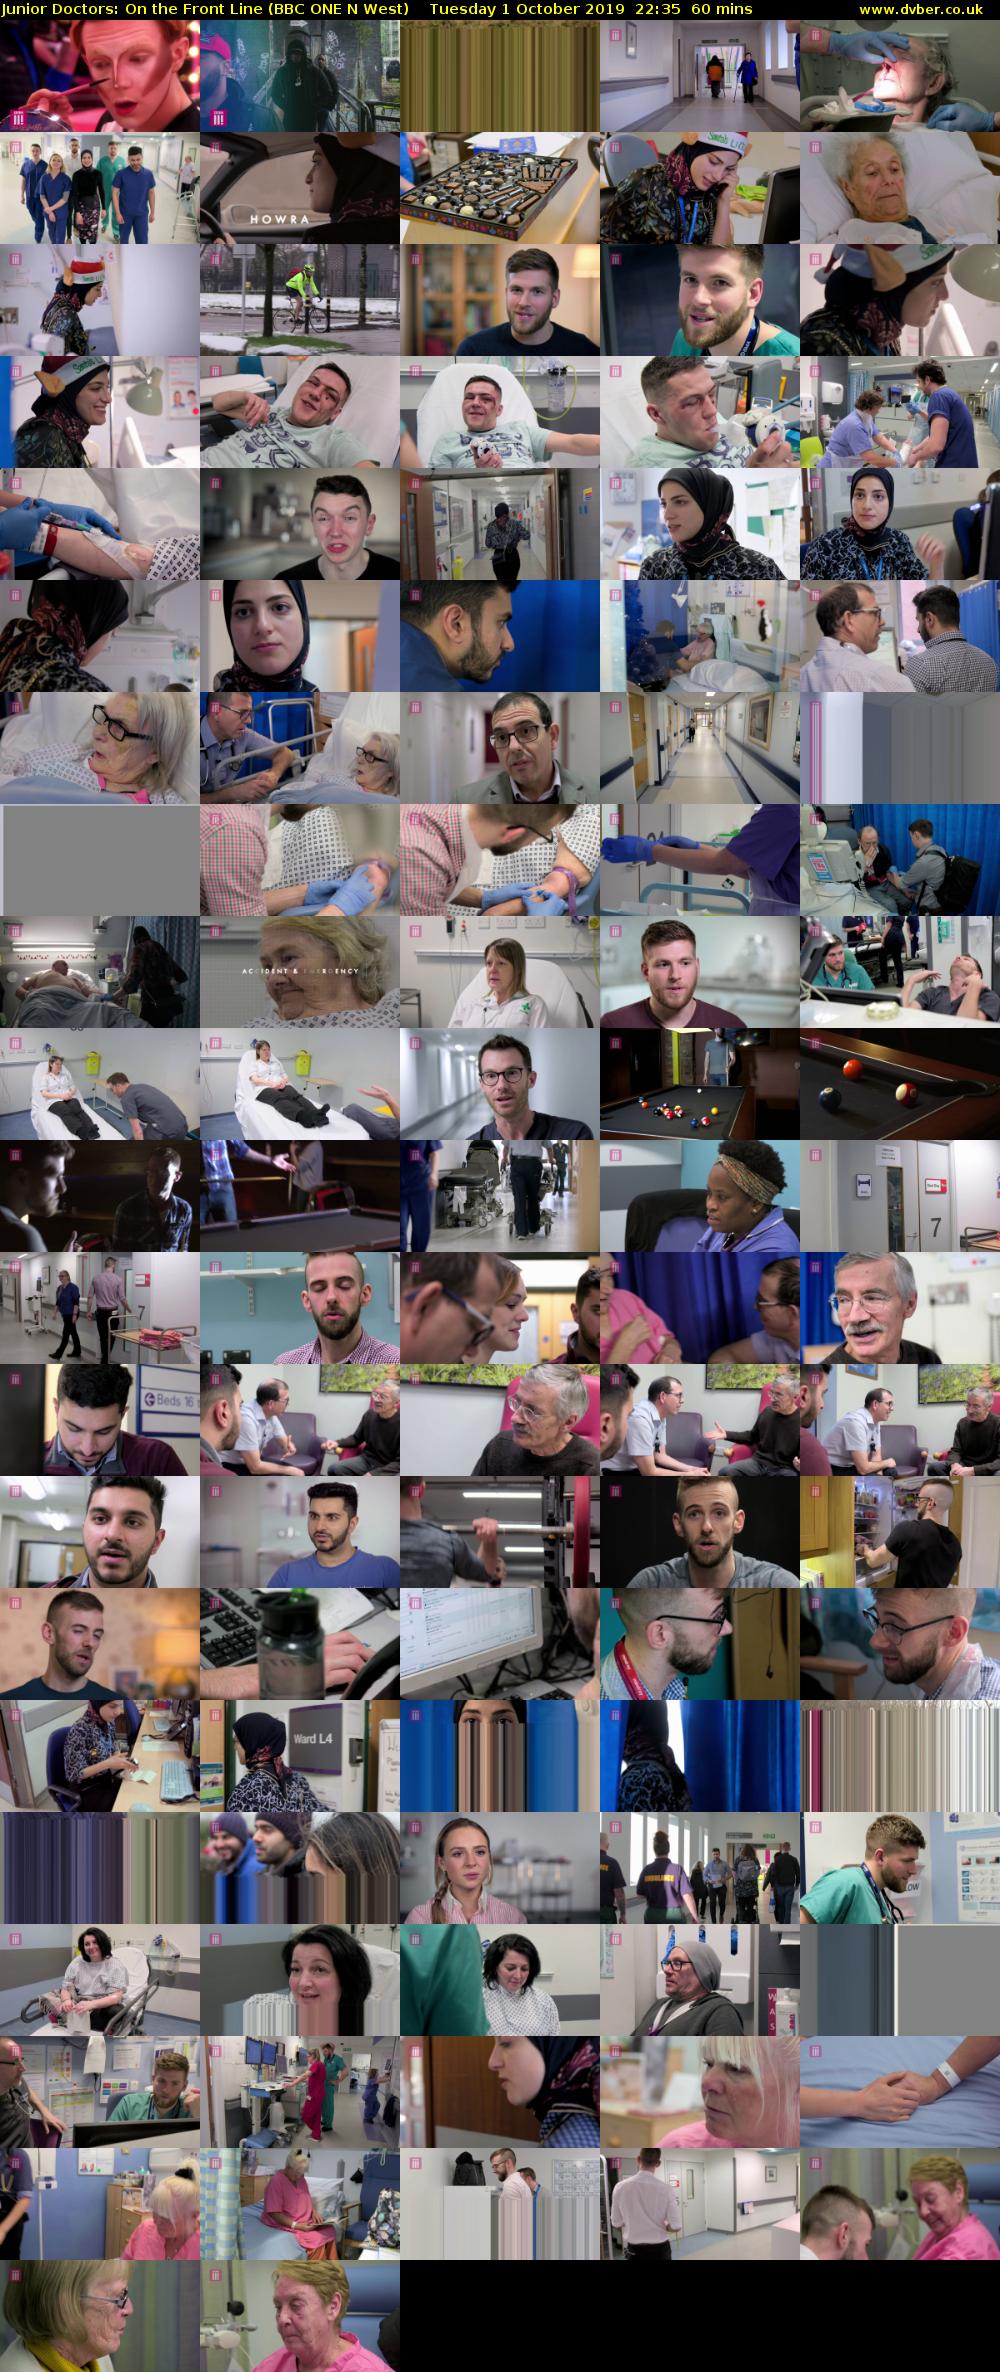 Junior Doctors: On the Front Line (BBC ONE N West) Tuesday 1 October 2019 22:35 - 23:35